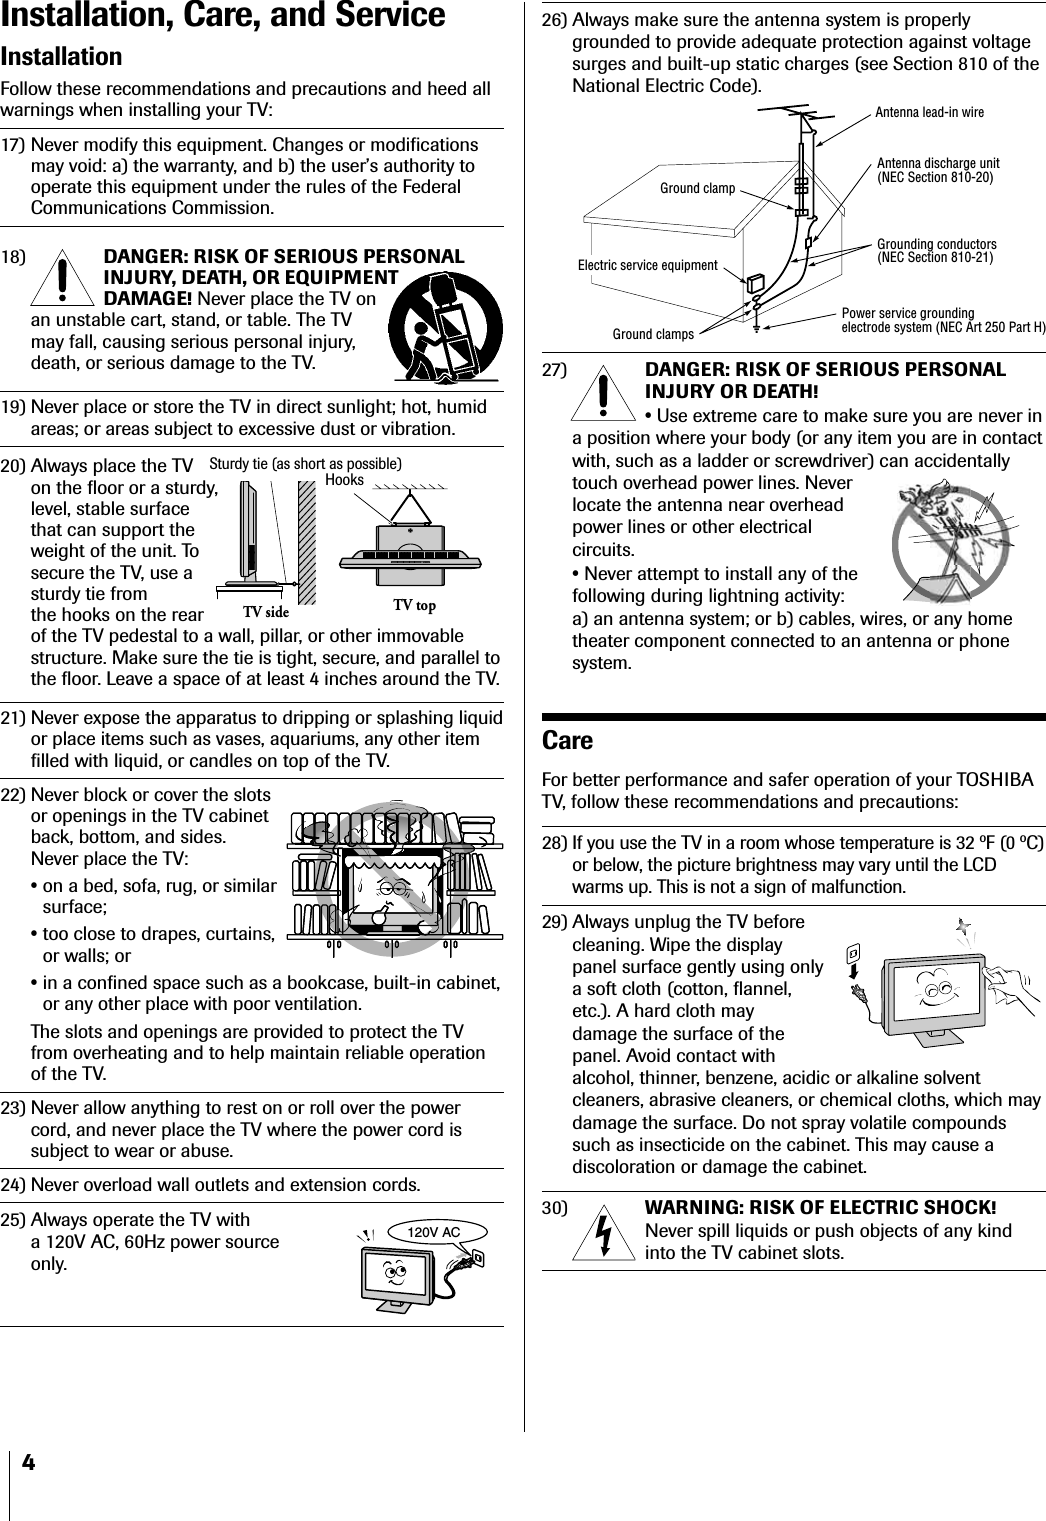 4Installation, Care, and ServiceInstallationFollow these recommendations and precautions and heed allwarnings when installing your TV:17) Never modify this equipment. Changes or modificationsmay void: a) the warranty, and b) the user’s authority tooperate this equipment under the rules of the FederalCommunications Commission.18) DANGER: RISK OF SERIOUS PERSONALINJURY, DEATH, OR EQUIPMENTDAMAGE! Never place the TV onan unstable cart, stand, or table. The TVmay fall, causing serious personal injury,death, or serious damage to the TV.19) Never place or store the TV in direct sunlight; hot, humidareas; or areas subject to excessive dust or vibration.20) Always place the TVon the floor or a sturdy,level, stable surfacethat can support theweight of the unit. Tosecure the TV, use asturdy tie fromthe hooks on the rearof the TV pedestal to a wall, pillar, or other immovablestructure. Make sure the tie is tight, secure, and parallel tothe floor. Leave a space of at least 4 inches around the TV.21) Never expose the apparatus to dripping or splashing liquidor place items such as vases, aquariums, any other itemfilled with liquid, or candles on top of the TV.22) Never block or cover the slotsor openings in the TV cabinetback, bottom, and sides.Never place the TV:•on a bed, sofa, rug, or similarsurface;•too close to drapes, curtains,or walls; or•in a confined space such as a bookcase, built-in cabinet,or any other place with poor ventilation.The slots and openings are provided to protect the TVfrom overheating and to help maintain reliable operationof the TV.23) Never allow anything to rest on or roll over the powercord, and never place the TV where the power cord issubject to wear or abuse.24) Never overload wall outlets and extension cords.25) Always operate the TV witha 120V AC, 60Hz power sourceonly.26) Always make sure the antenna system is properlygrounded to provide adequate protection against voltagesurges and built-up static charges (see Section 810 of theNational Electric Code).27) DANGER: RISK OF SERIOUS PERSONALINJURY OR DEATH!•Use extreme care to make sure you are never ina position where your body (or any item you are in contactwith, such as a ladder or screwdriver) can accidentallytouch overhead power lines. Neverlocate the antenna near overheadpower lines or other electricalcircuits.•Never attempt to install any of thefollowing during lightning activity:a) an antenna system; or b) cables, wires, or any hometheater component connected to an antenna or phonesystem.CareFor better performance and safer operation of your TOSHIBATV, follow these recommendations and precautions:28)If you use the TV in a room whose temperature is 32 ºF (0 ºC)or below, the picture brightness may vary until the LCDwarms up. This is not a sign of malfunction.29) Always unplug the TV beforecleaning. Wipe the displaypanel surface gently using onlya soft cloth (cotton, flannel,etc.). A hard cloth maydamage the surface of thepanel. Avoid contact withalcohol, thinner, benzene, acidic or alkaline solventcleaners, abrasive cleaners, or chemical cloths, which maydamage the surface. Do not spray volatile compoundssuch as insecticide on the cabinet. This may cause adiscoloration or damage the cabinet.30) WARNING: RISK OF ELECTRIC SHOCK!Never spill liquids or push objects of any kindinto the TV cabinet slots.Ground clampAntenna discharge unit(NEC Section 810-20)Grounding conductors(NEC Section 810-21)Power service groundingelectrode system (NEC Art 250 Part H)Ground clampsAntenna lead-in wireElectric service equipment120V ACHooksTV topTV sideSturdy tie (as short as possible)